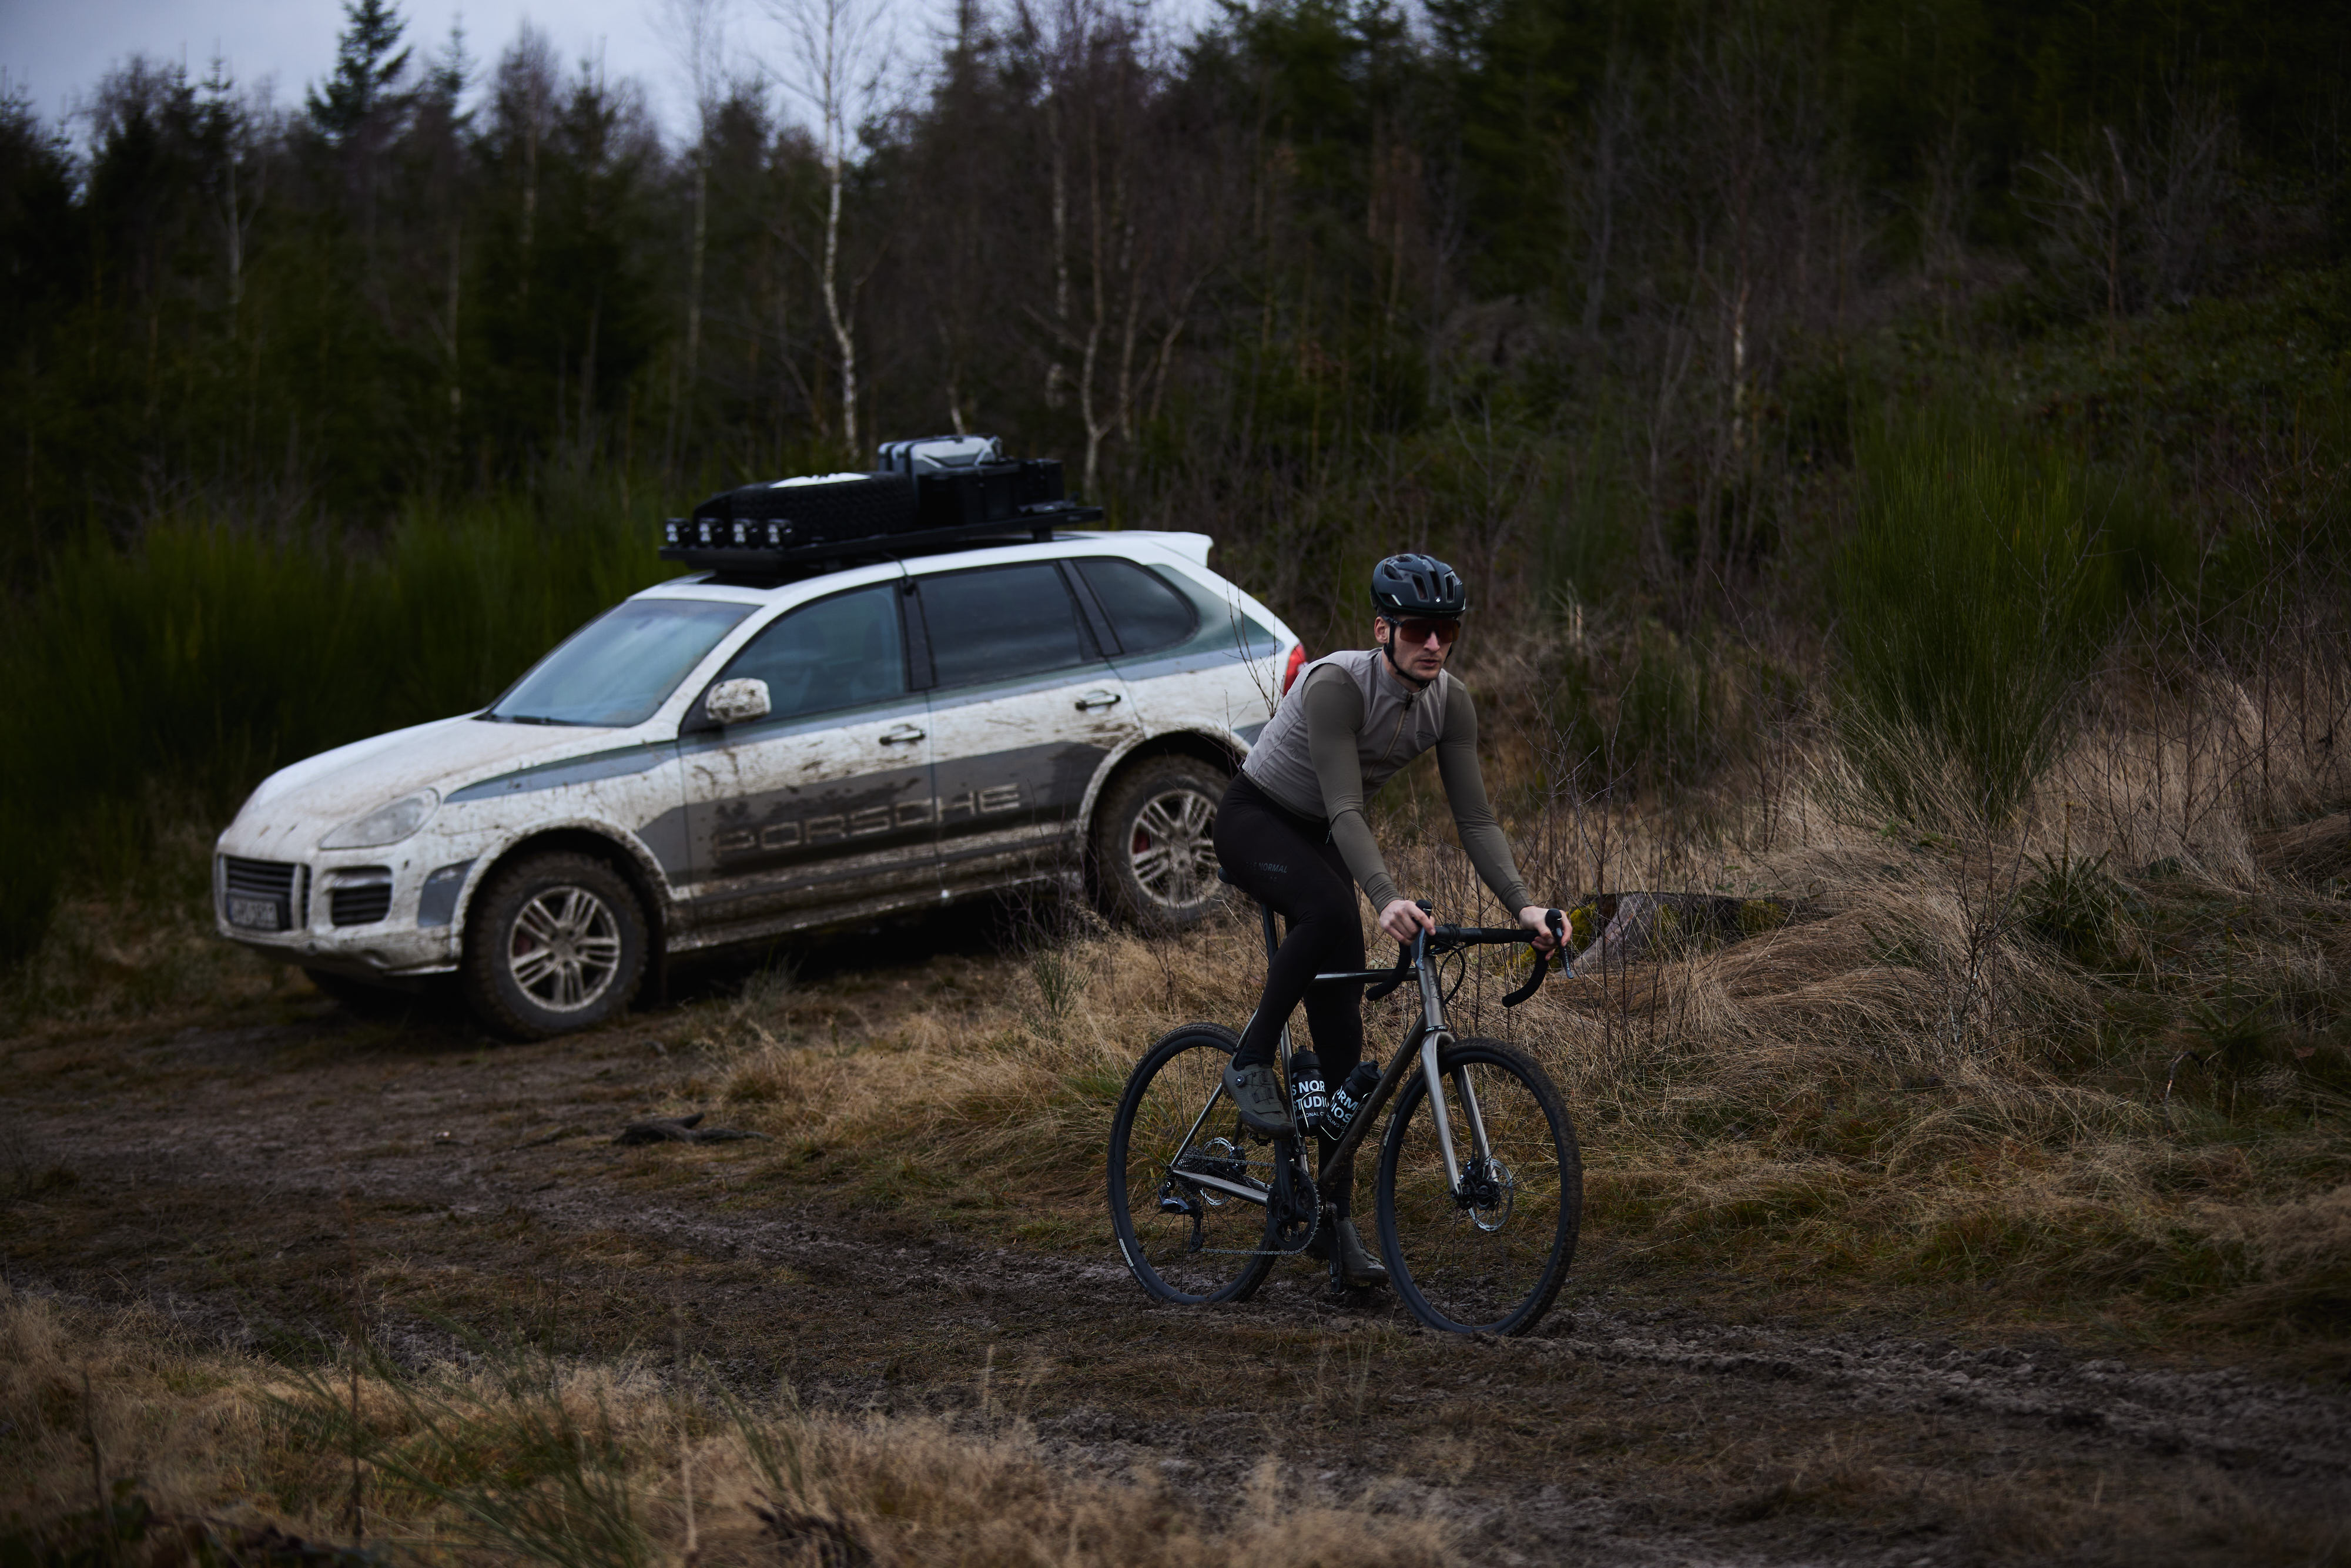 Cyclist on gravel bike in front of classic Cayenne in forest